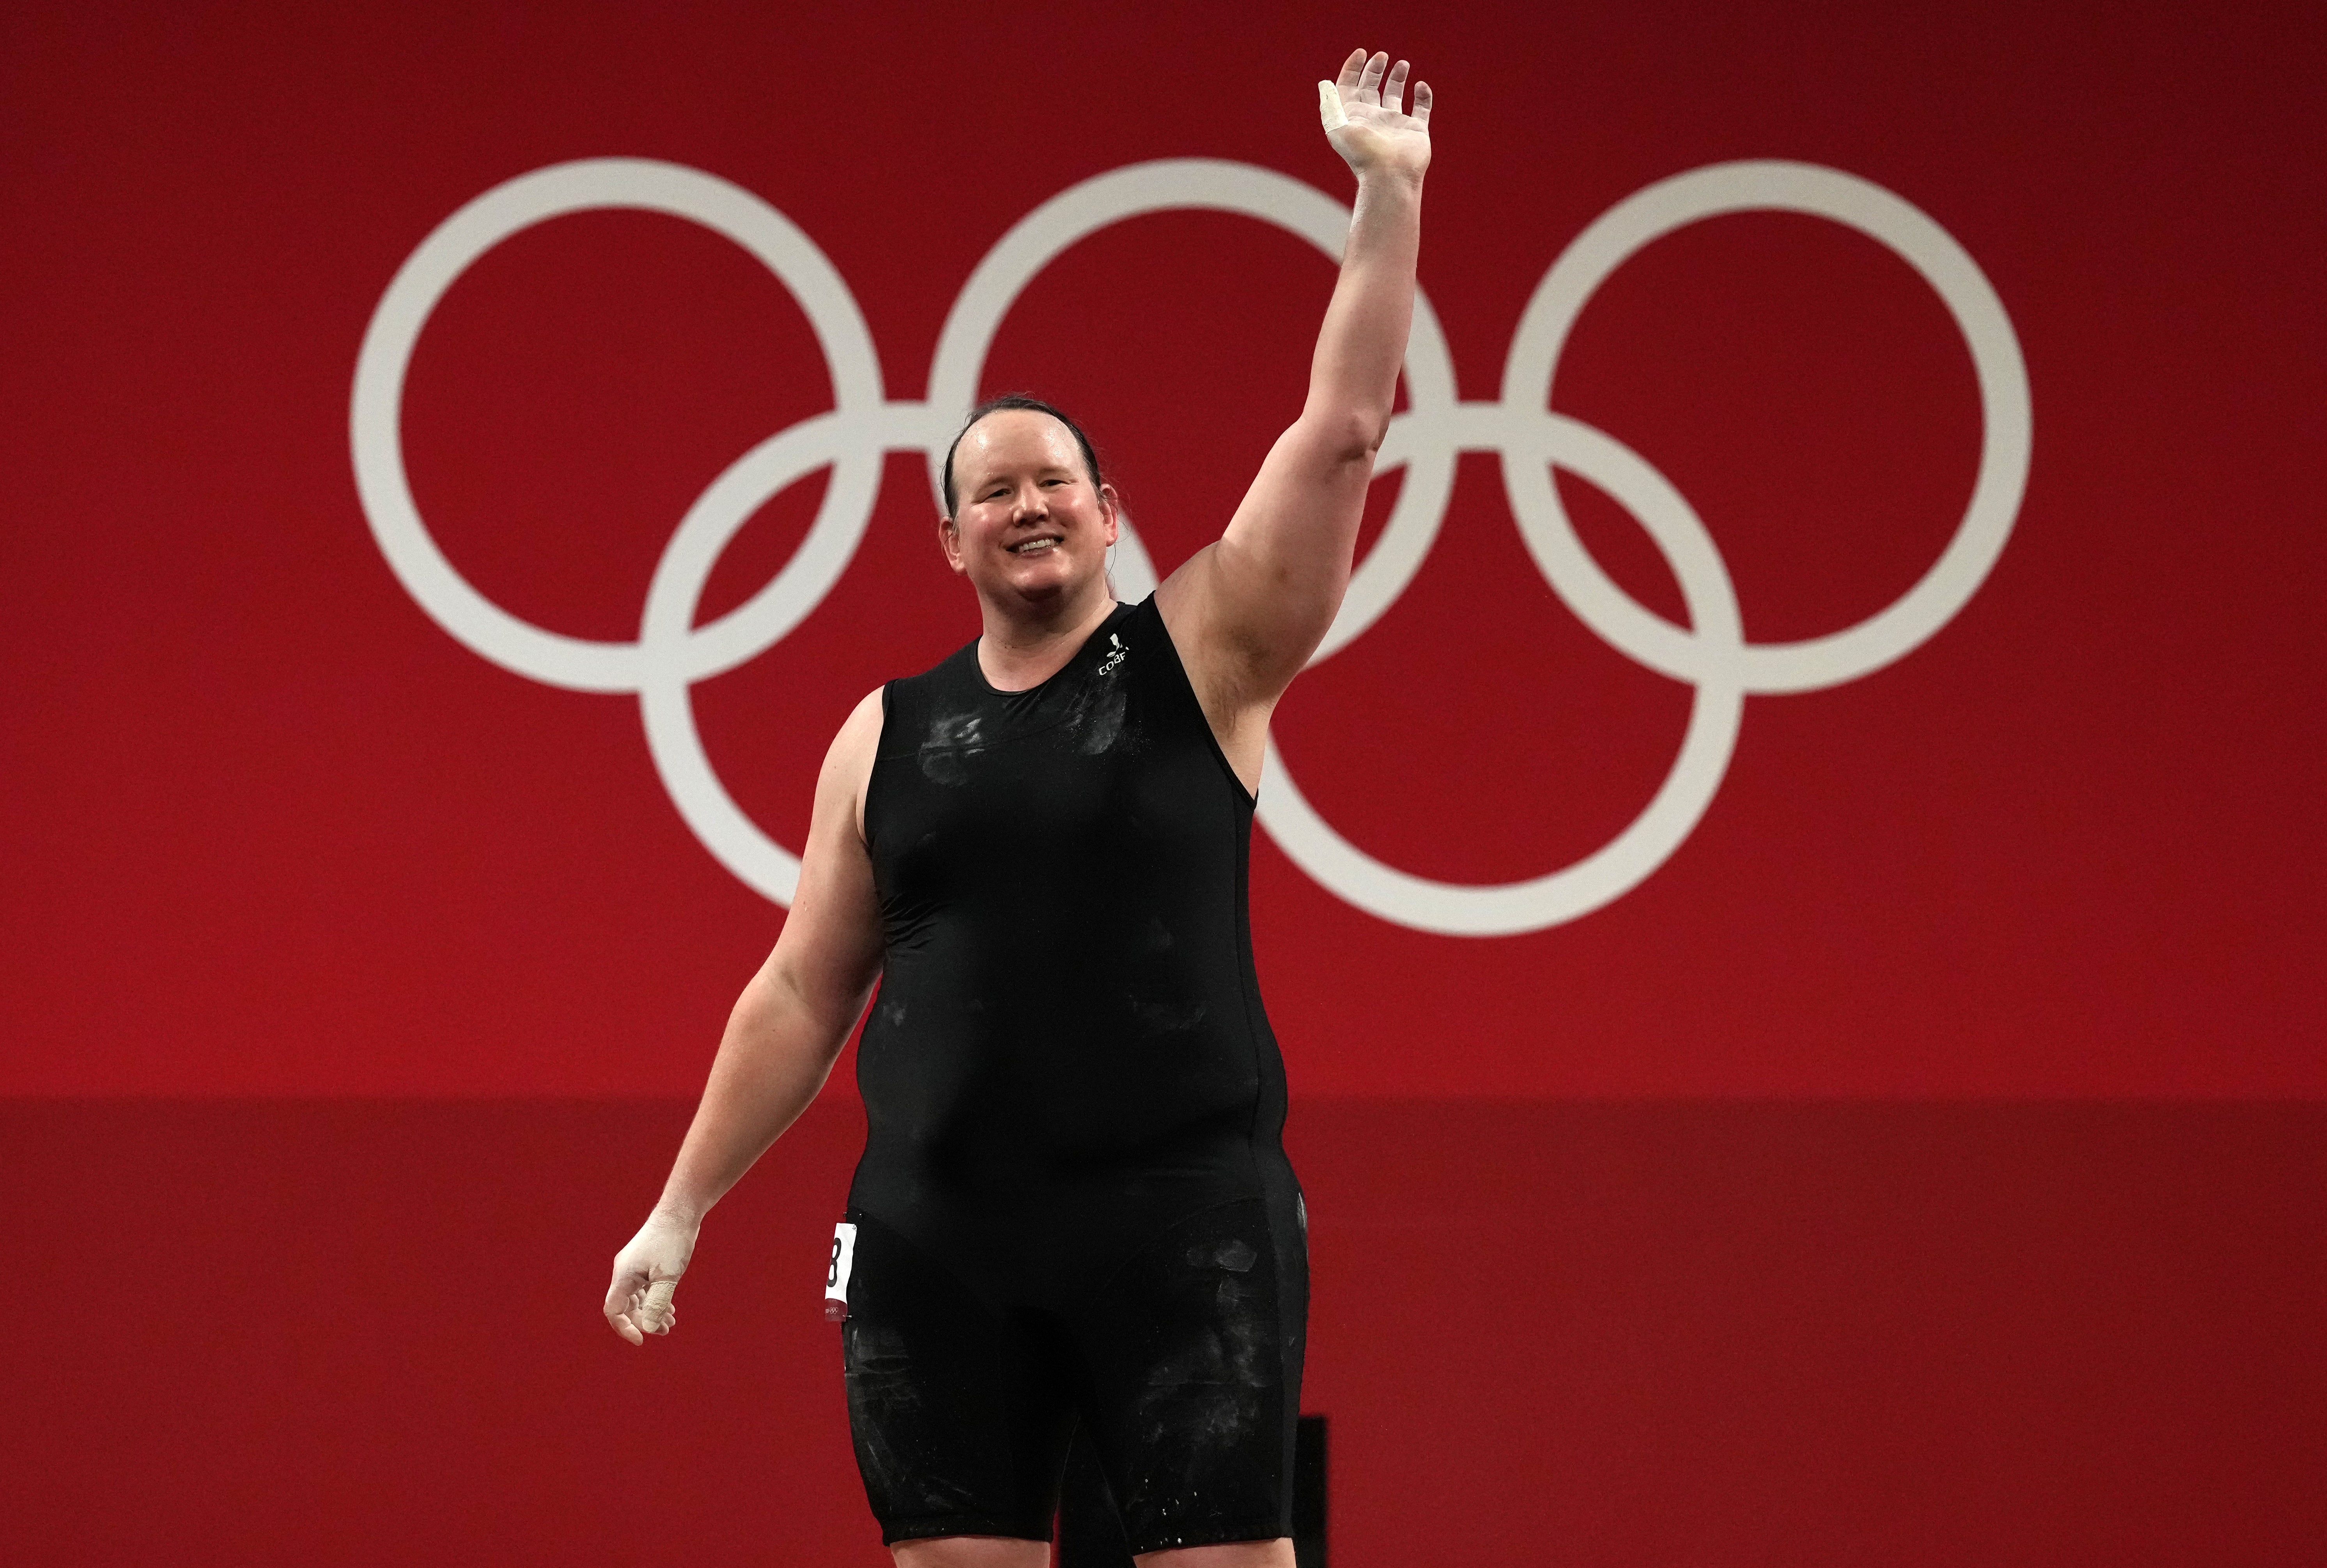 File: Laurel Hubbard became the first transgender sportsperson to compete at the Olympics this year